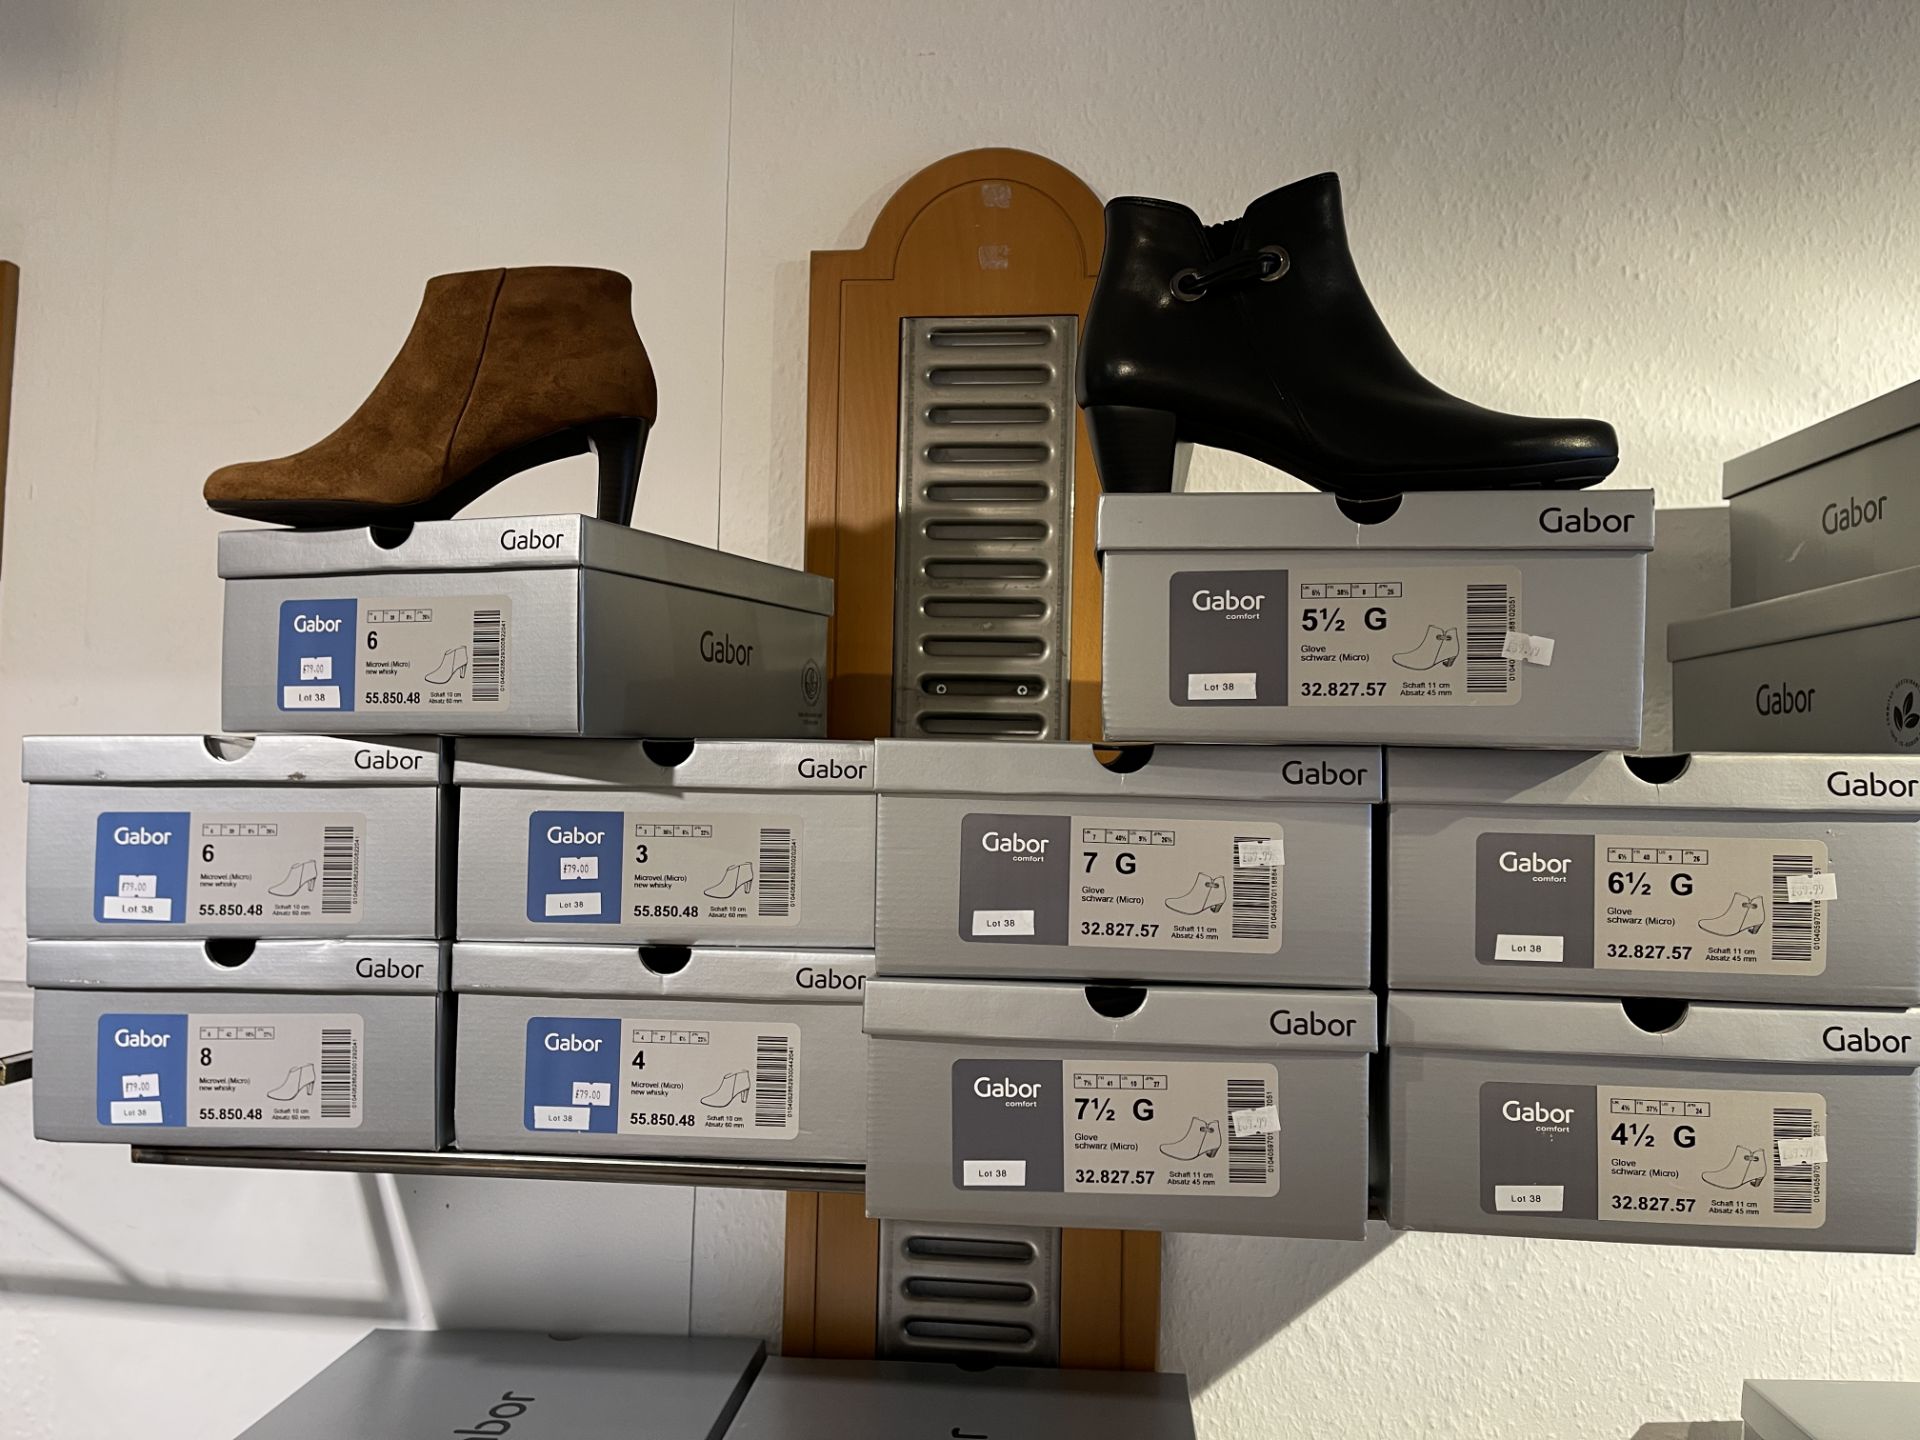 Gabor 5 Pairs: Microvel (Micro) New Whiskey Boots 55.850.48. Sizes 3 - 8 (RRP £79) Gabor 5 Pairs: